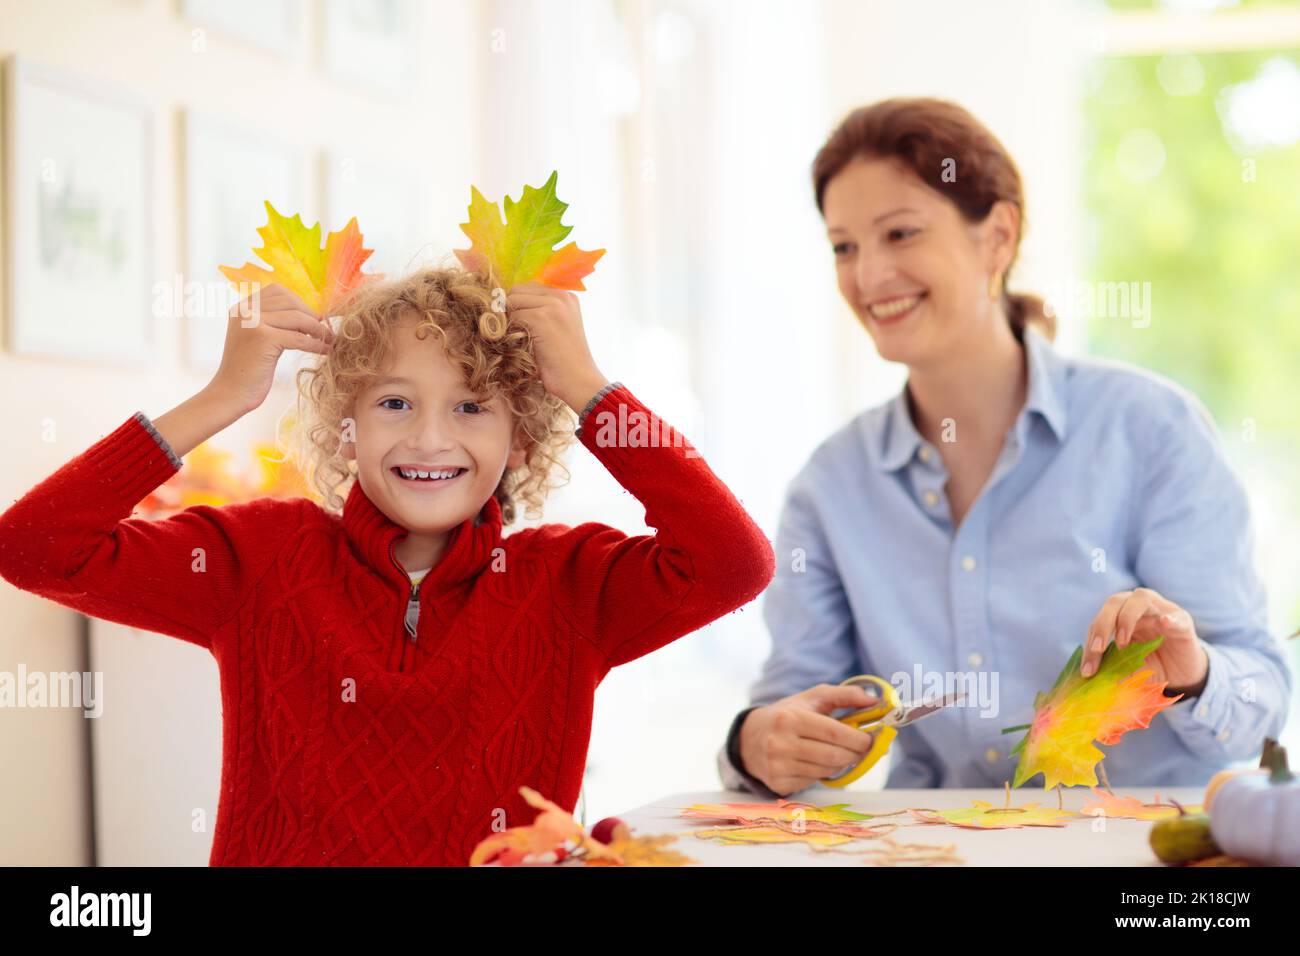 Autumn home decoration. Family decorating house with colorful maple leaves banner. Thanksgiving or Halloween celebration in white living room. Child w Stock Photo